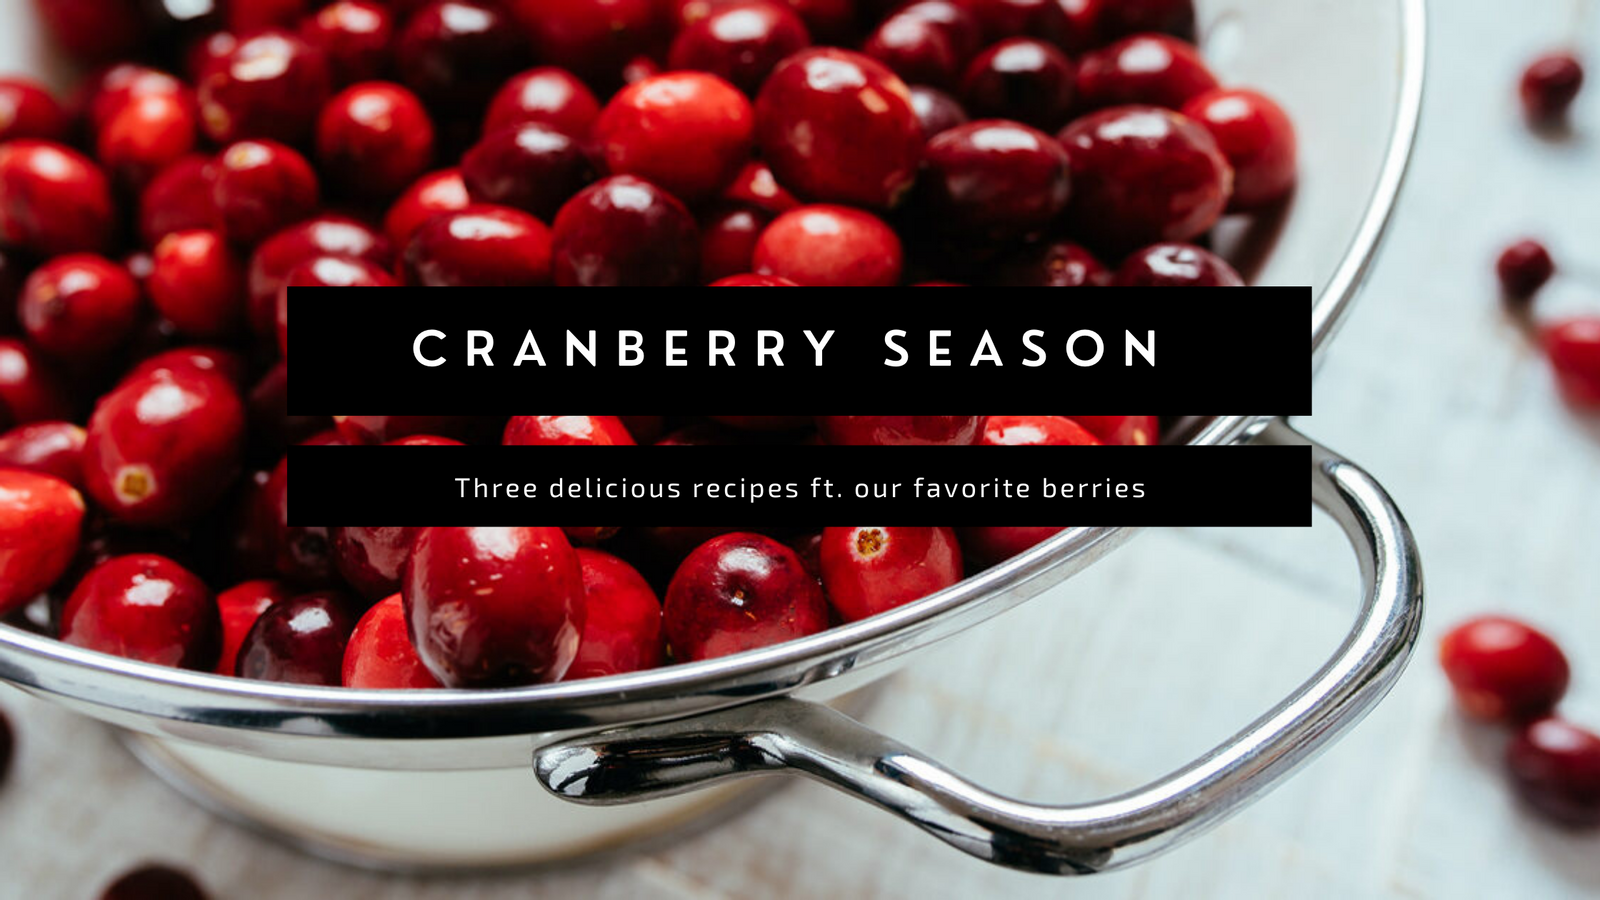 Cranberry Season is Here